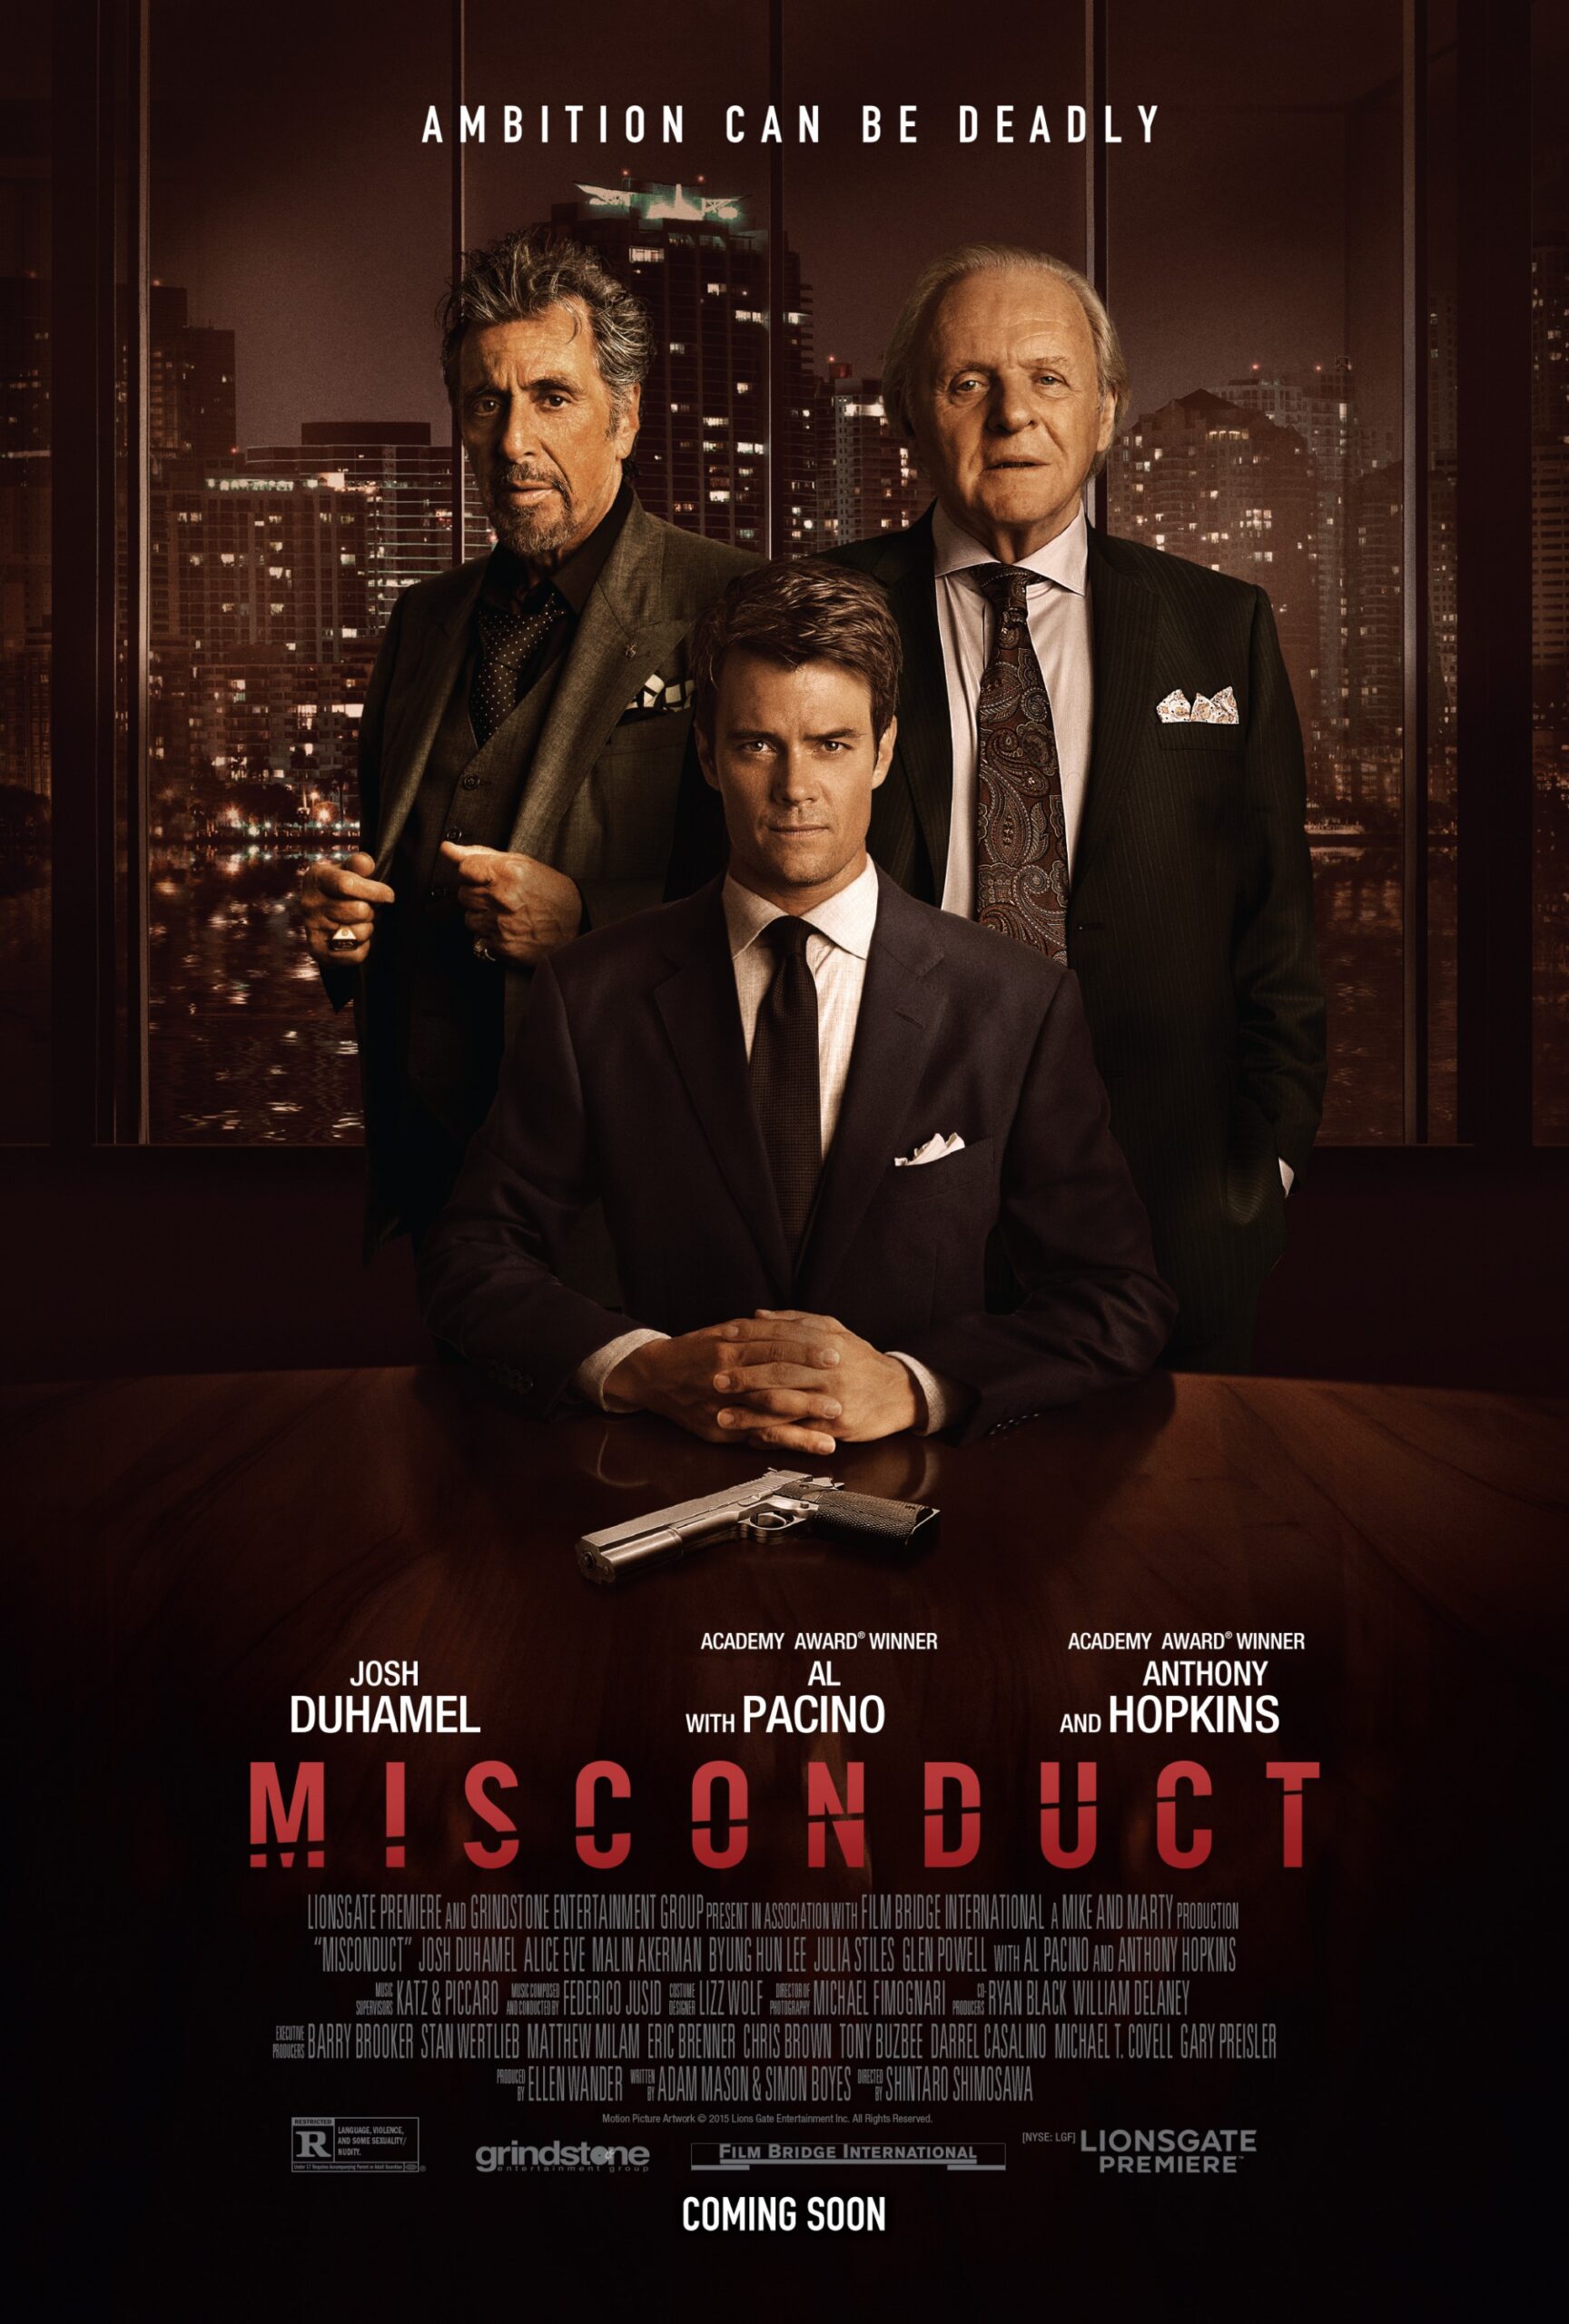 Misconduct poster goldposter com 1